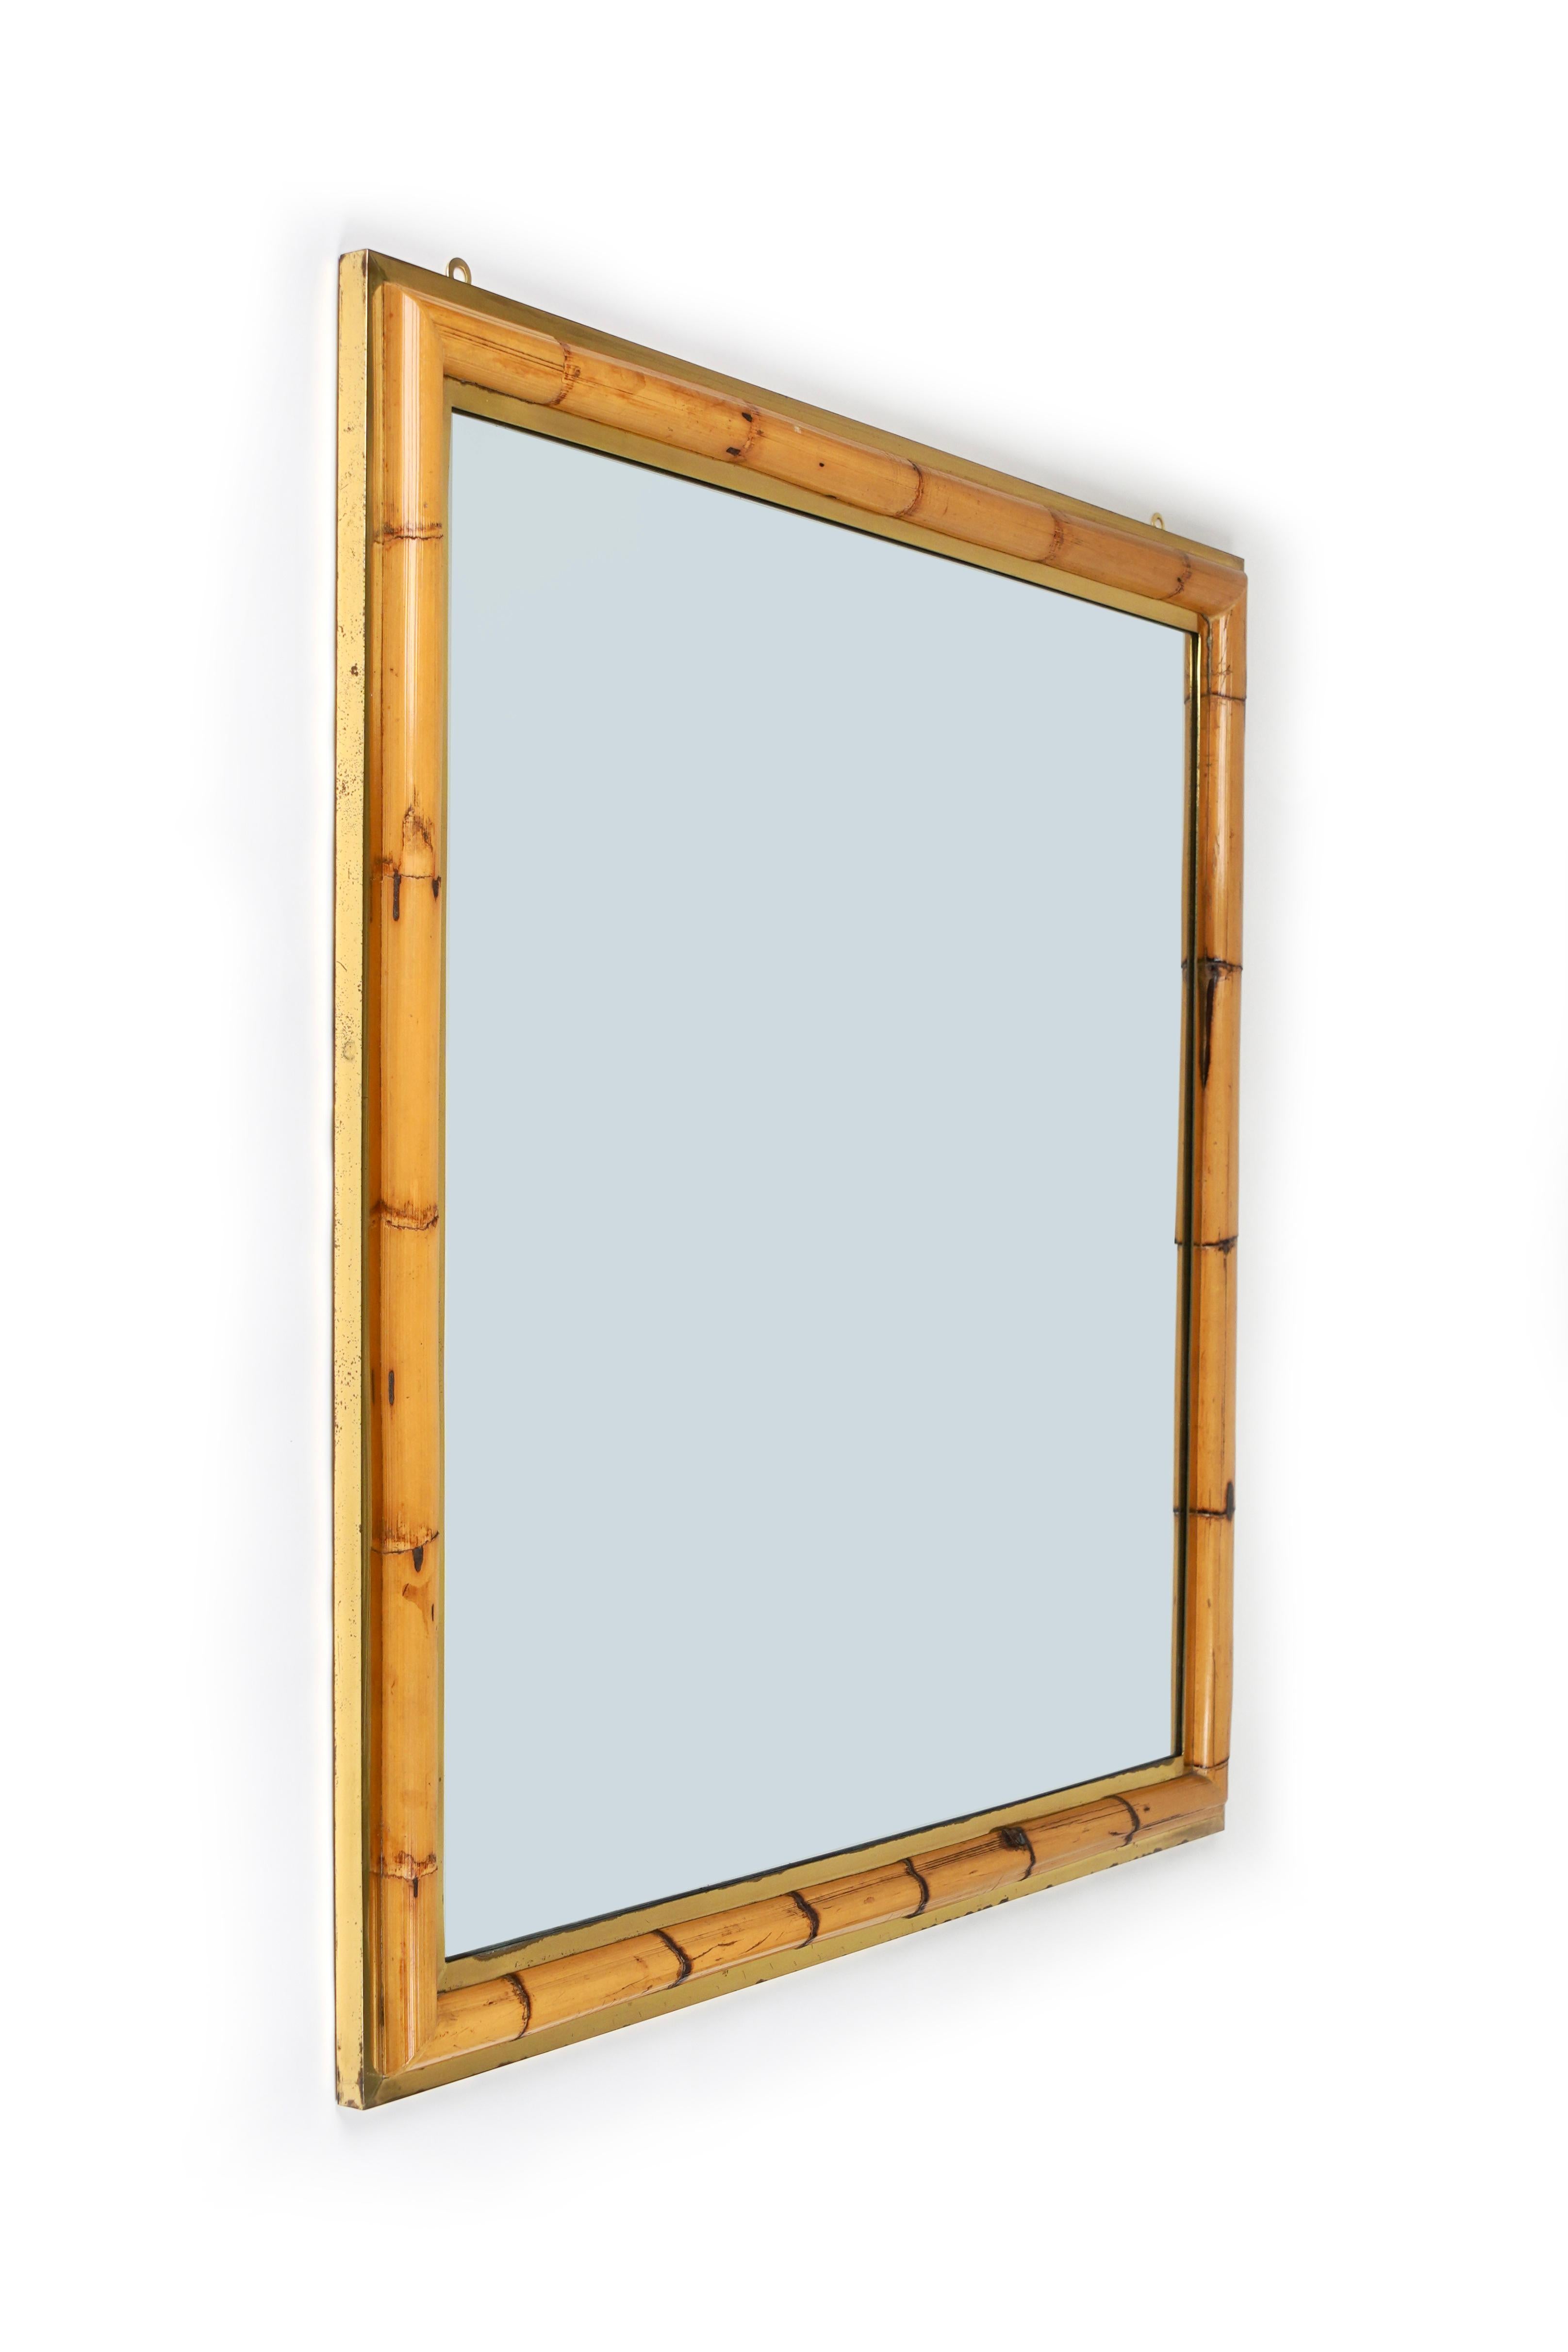 Mid-Century Modern Midcentury Squared Wall Mirror in Brass and Bamboo, Italy, 1970s For Sale